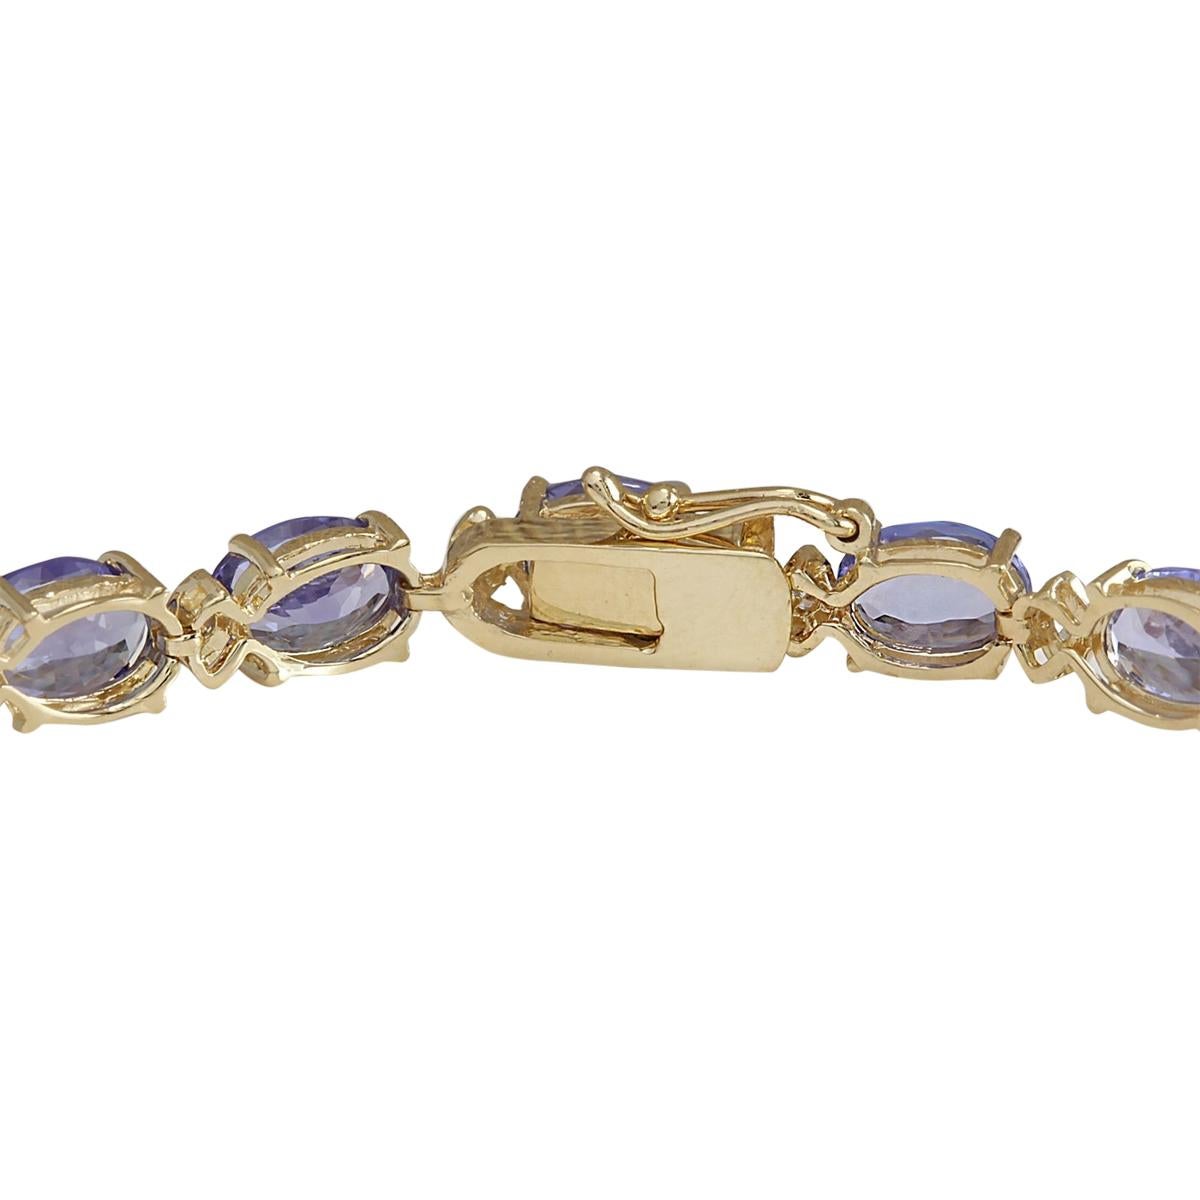 Indulge in opulent elegance with our 18.03 Carat Natural Tanzanite 14 Karat Yellow Gold Diamond Bracelet. Crafted from 14K Yellow Gold and stamped for authenticity, this exquisite piece weighs 12.0 grams, ensuring both durability and luxury.
With a